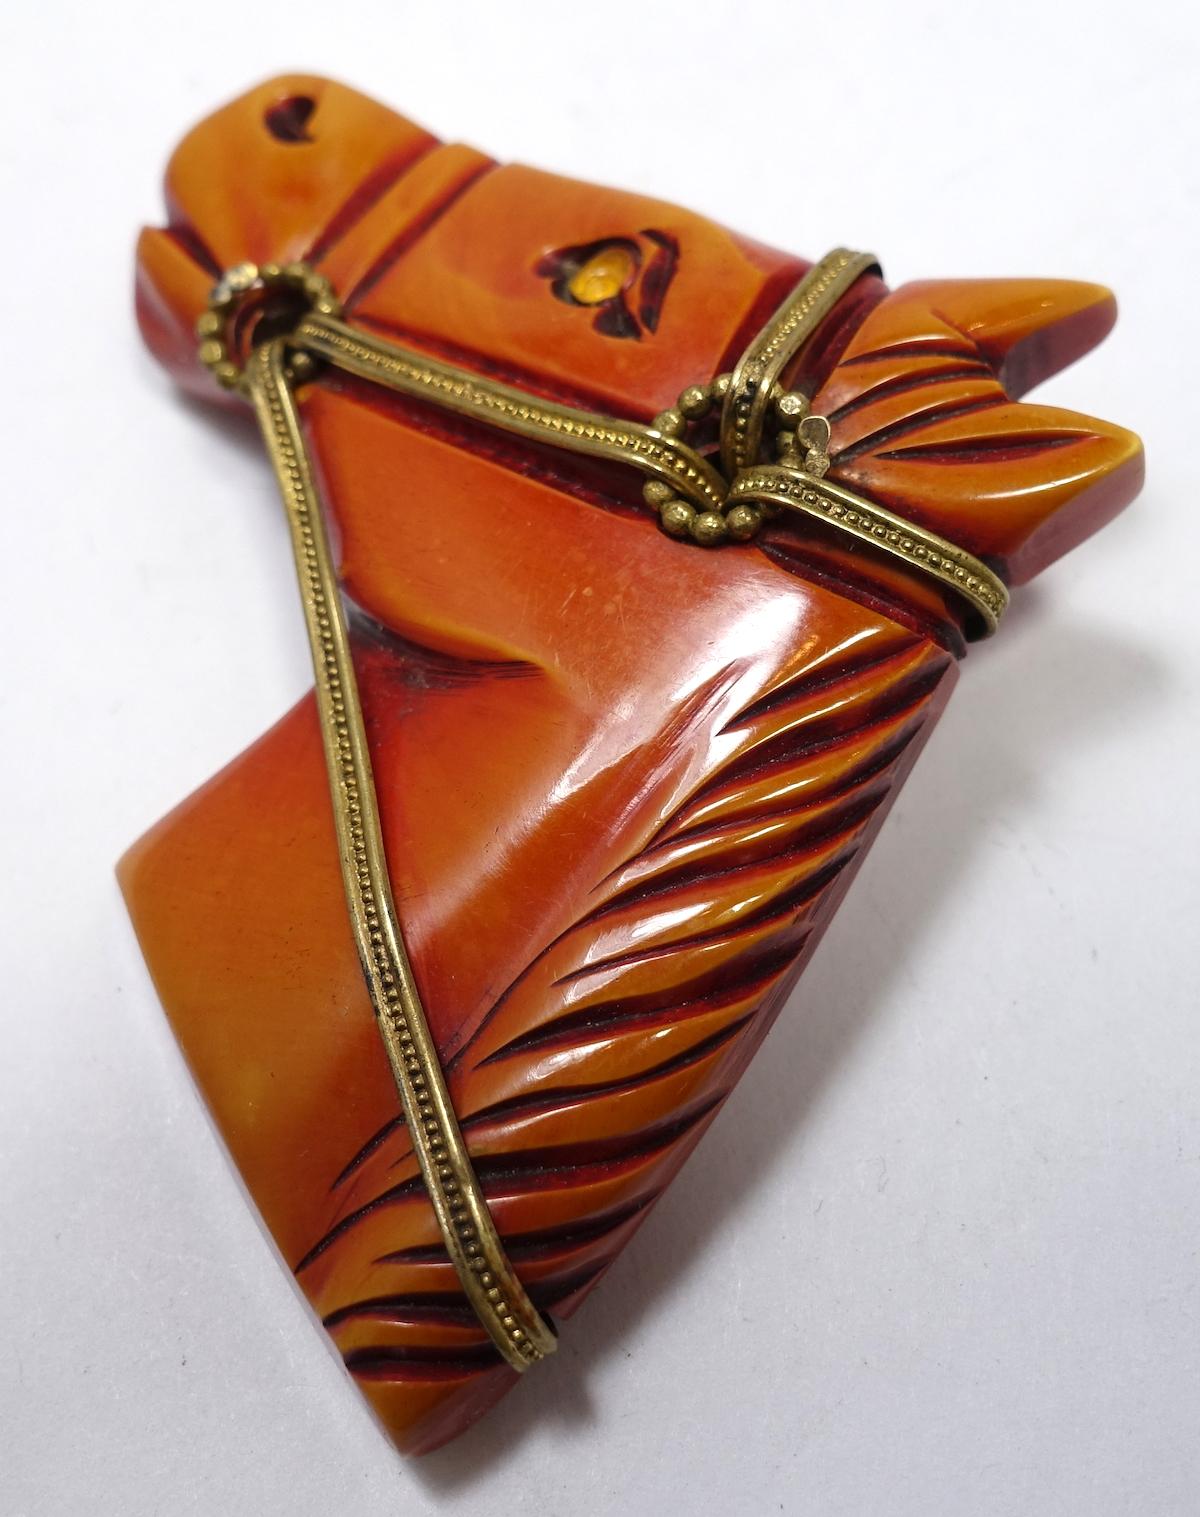 This vintage classic Bakelite brooch features a carved horse head with a gold tone harness.  In excellent condition, this brooch measures 3” x 2-1/4” with a turning c-pin clasp.